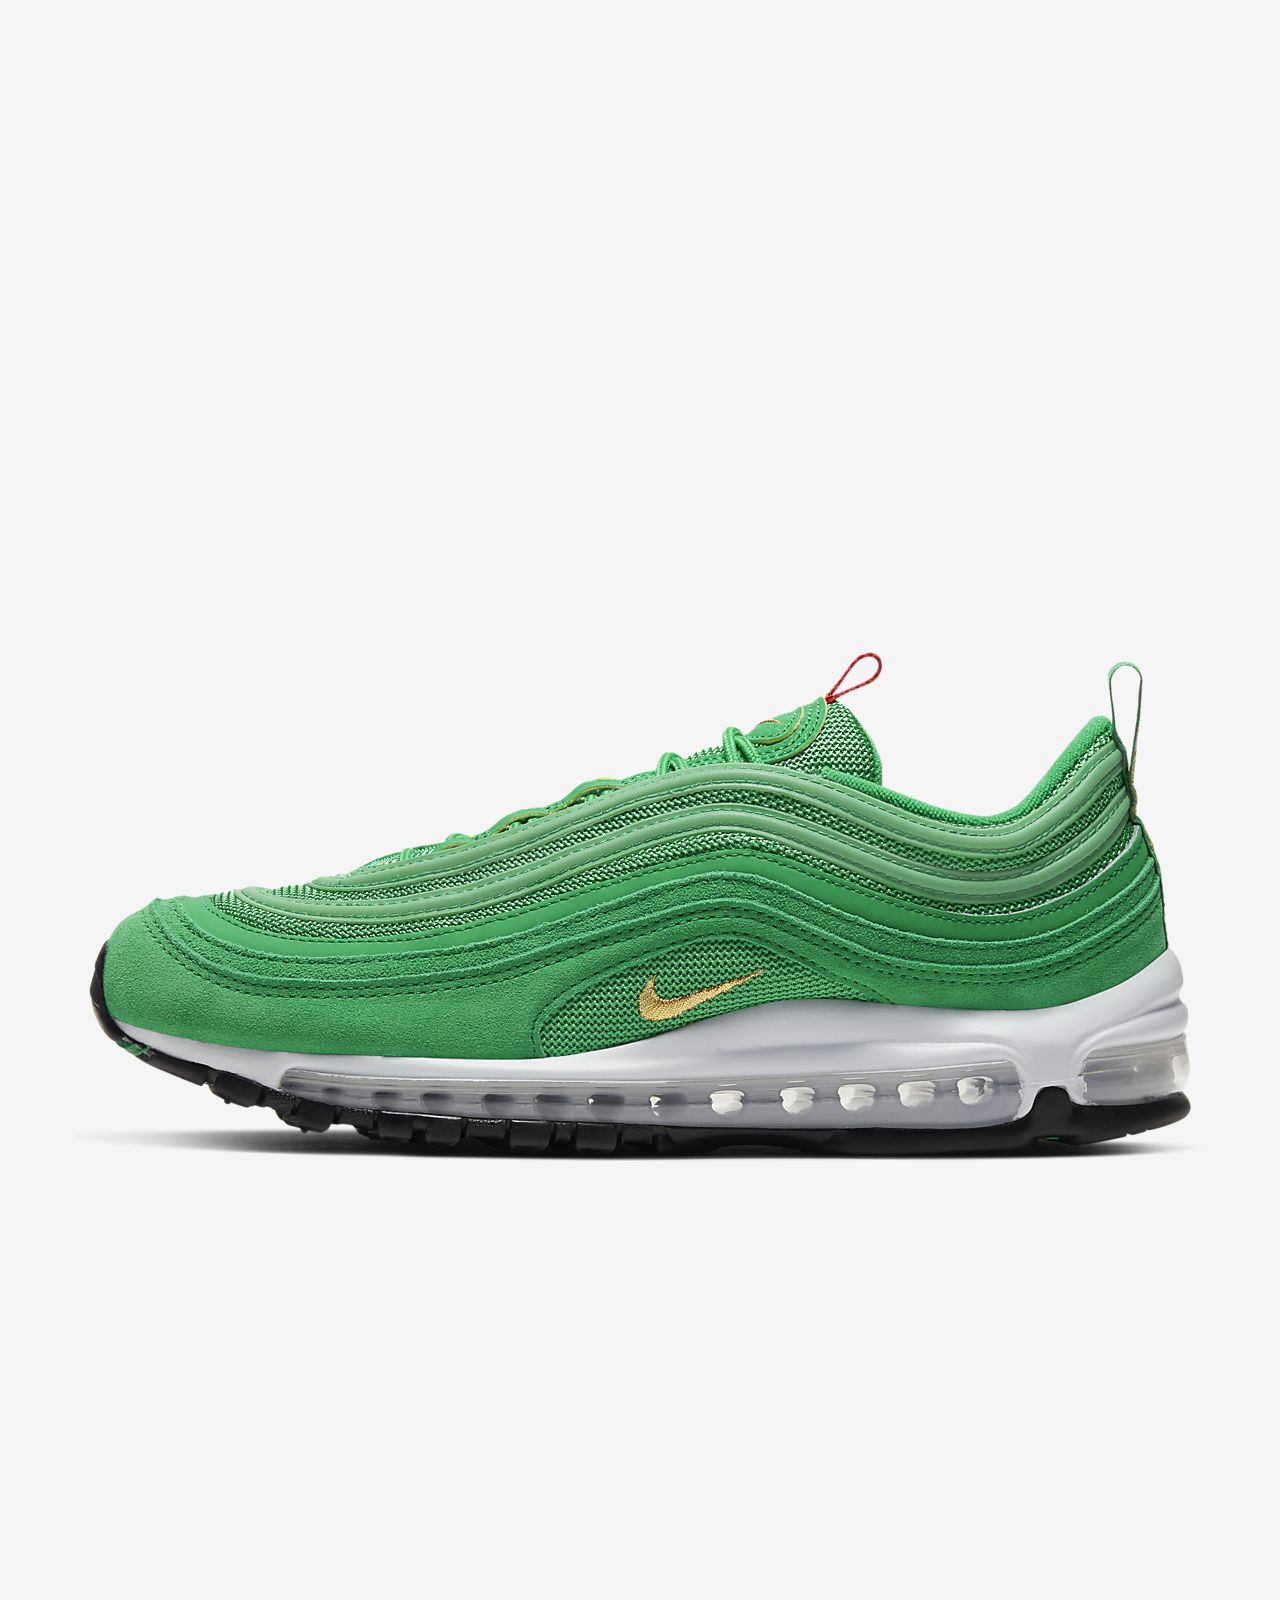 NIKE Official]Nike Air Max 97 Men's Shoe.Online store (mail order site)